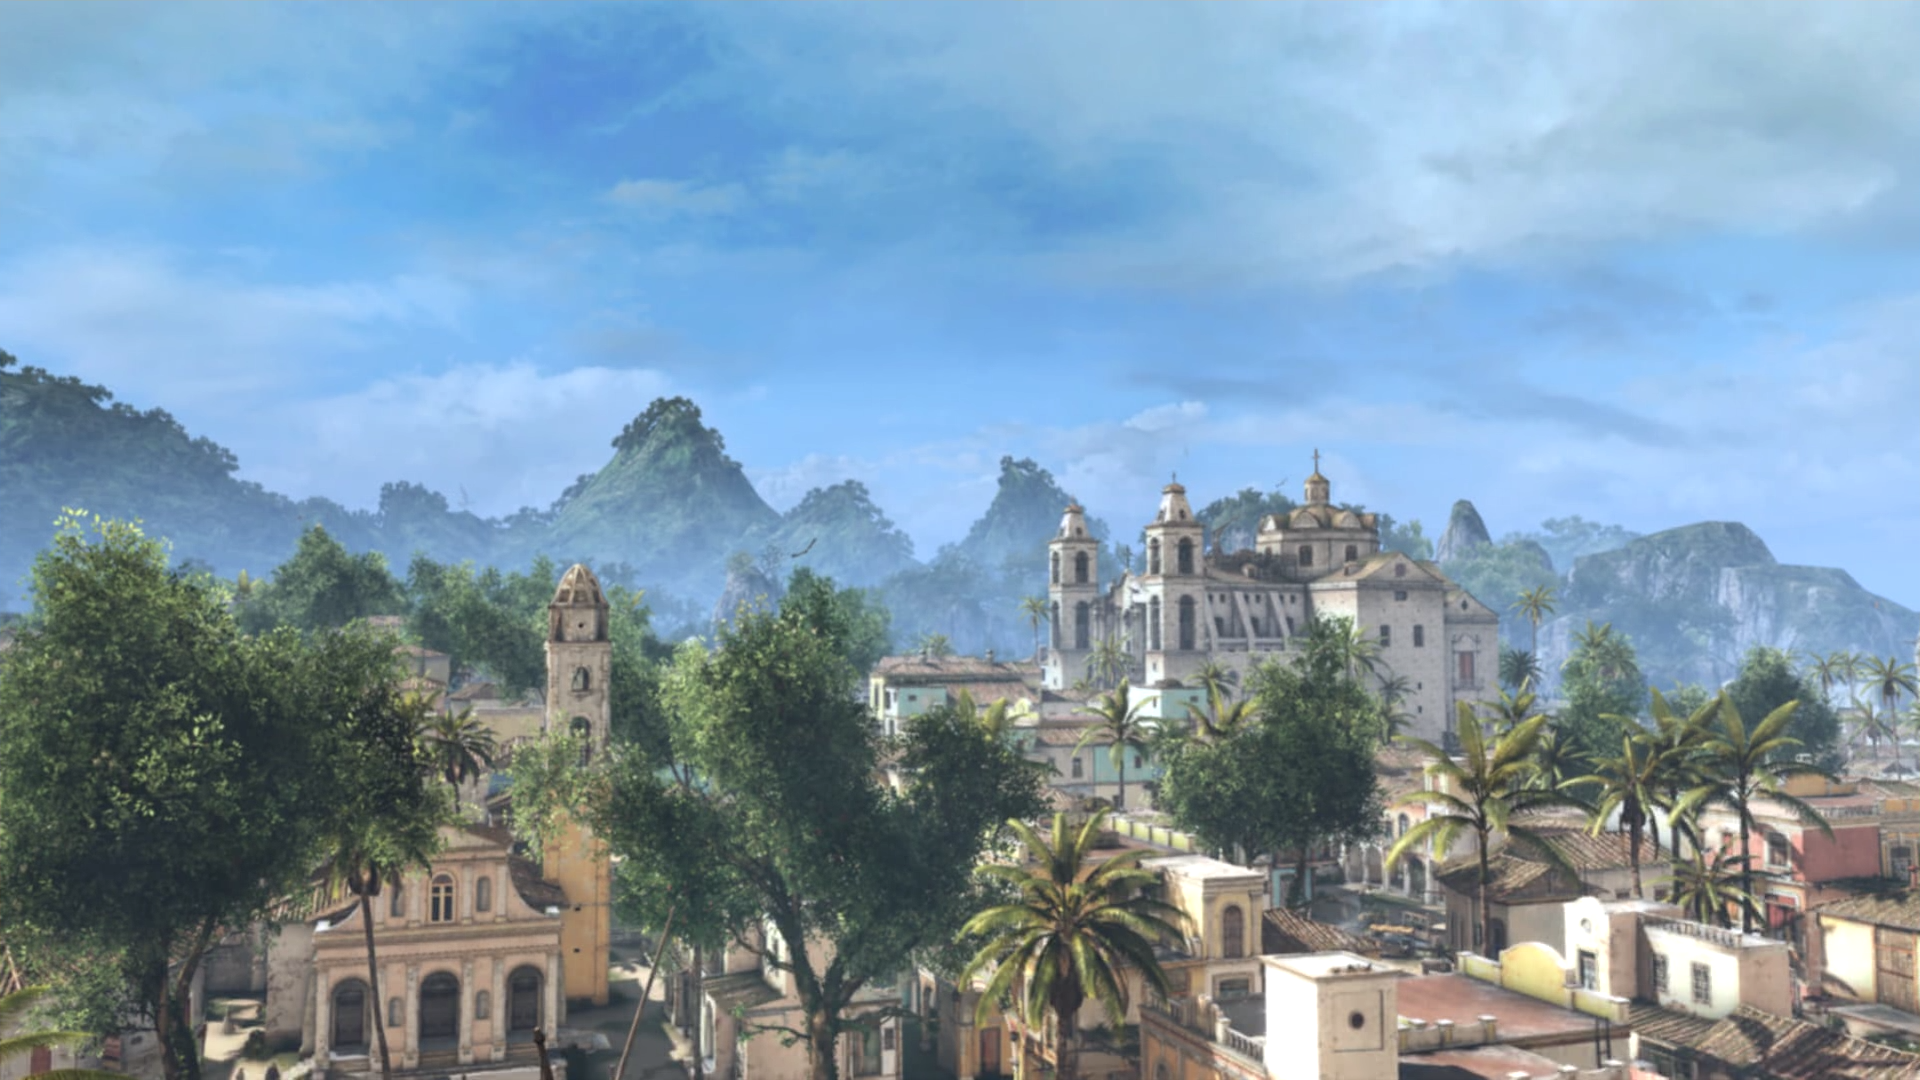 Assassin's Creed IV Black Flag 4_27_2022 2_58_51 PM.png